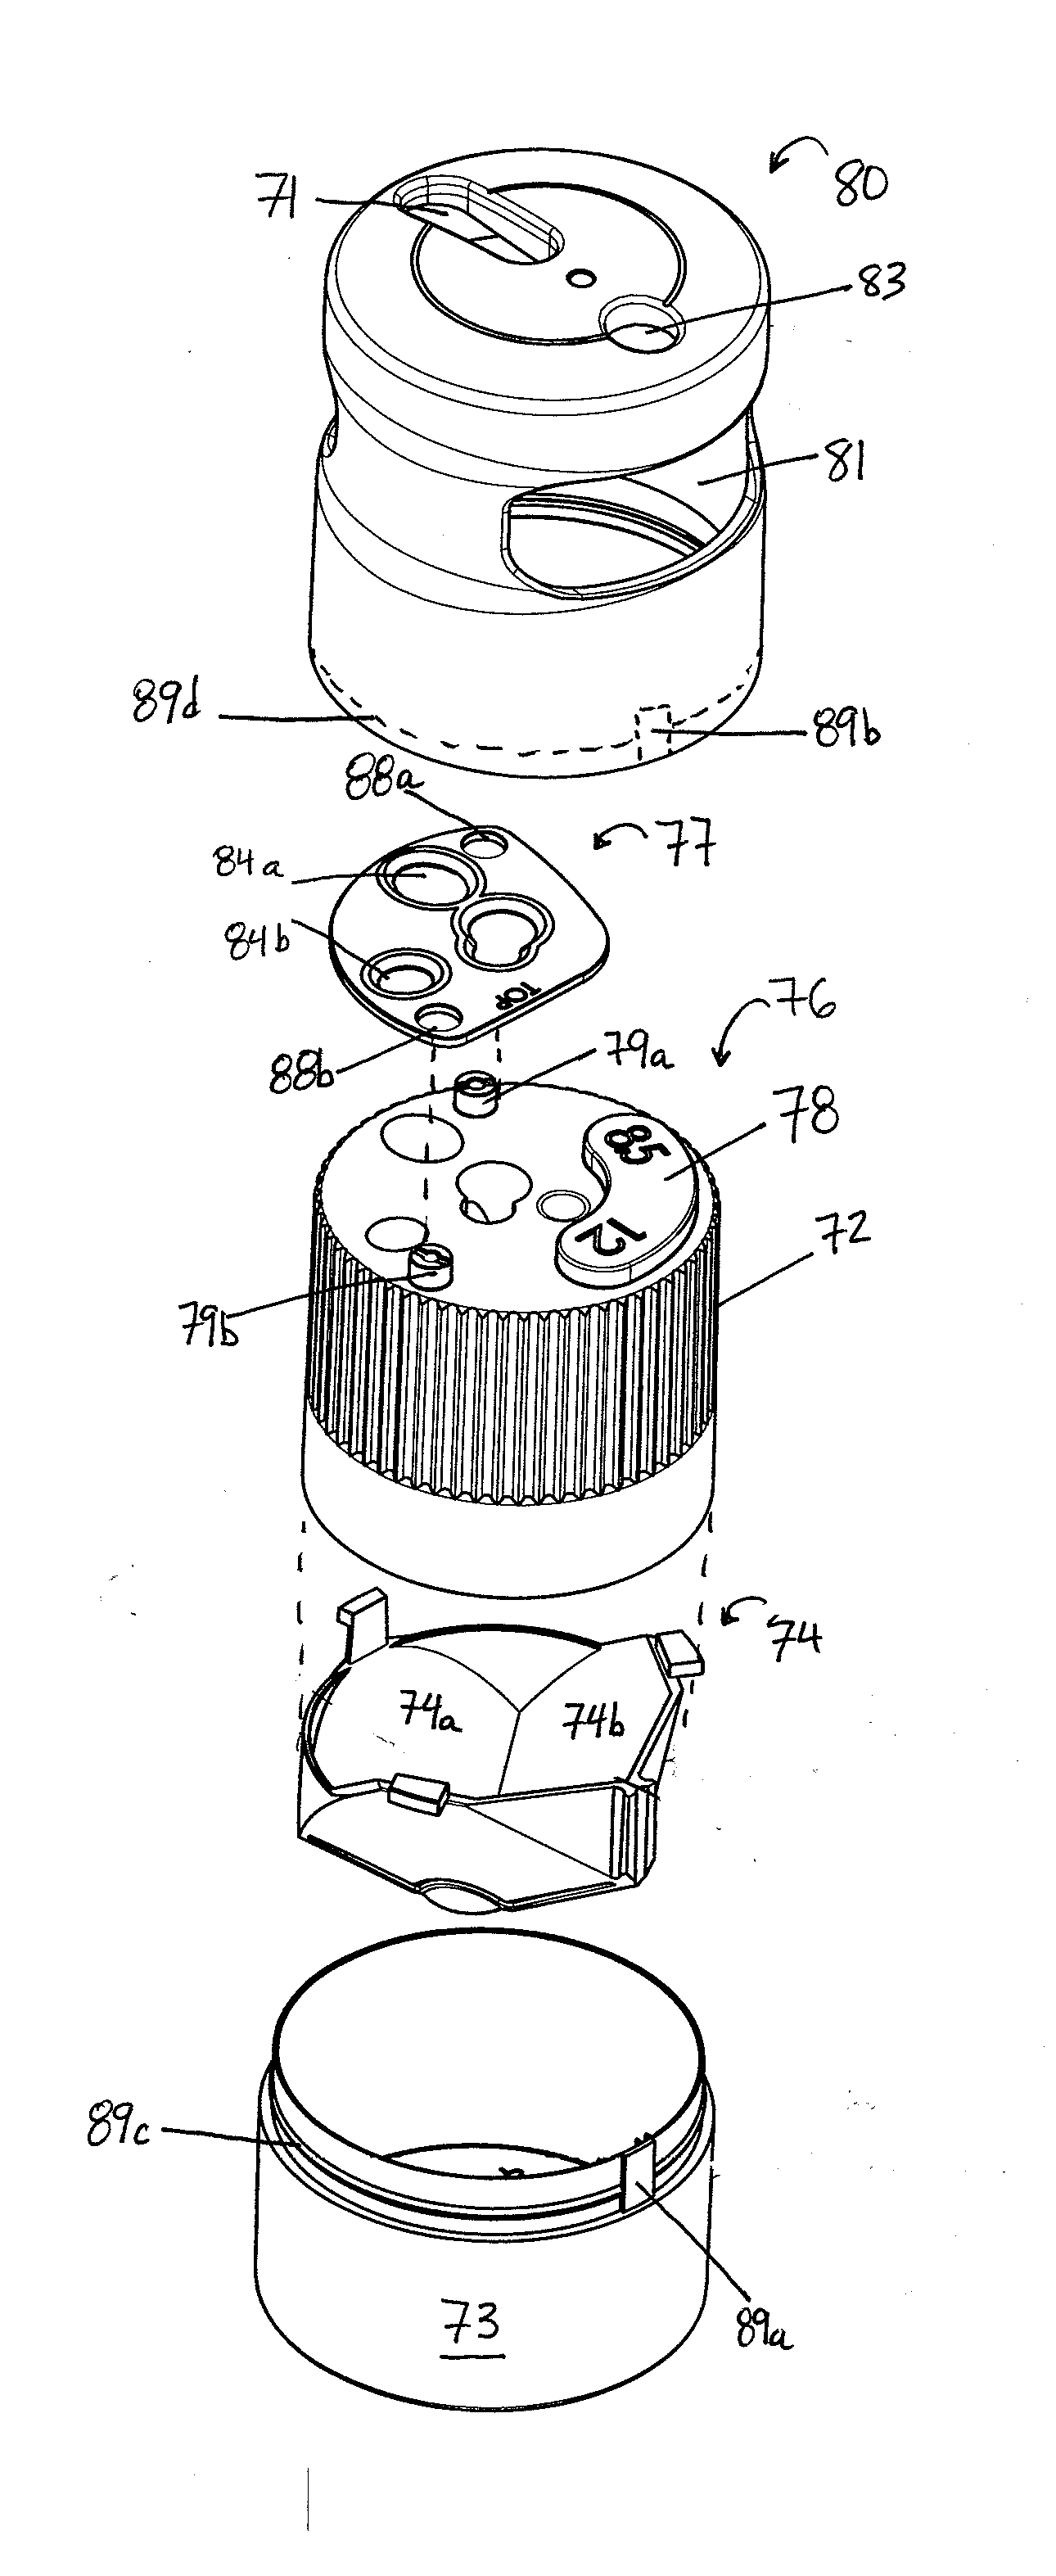 Three-dimensional target devices, assemblies and methods for calibrating an endoscopic camera